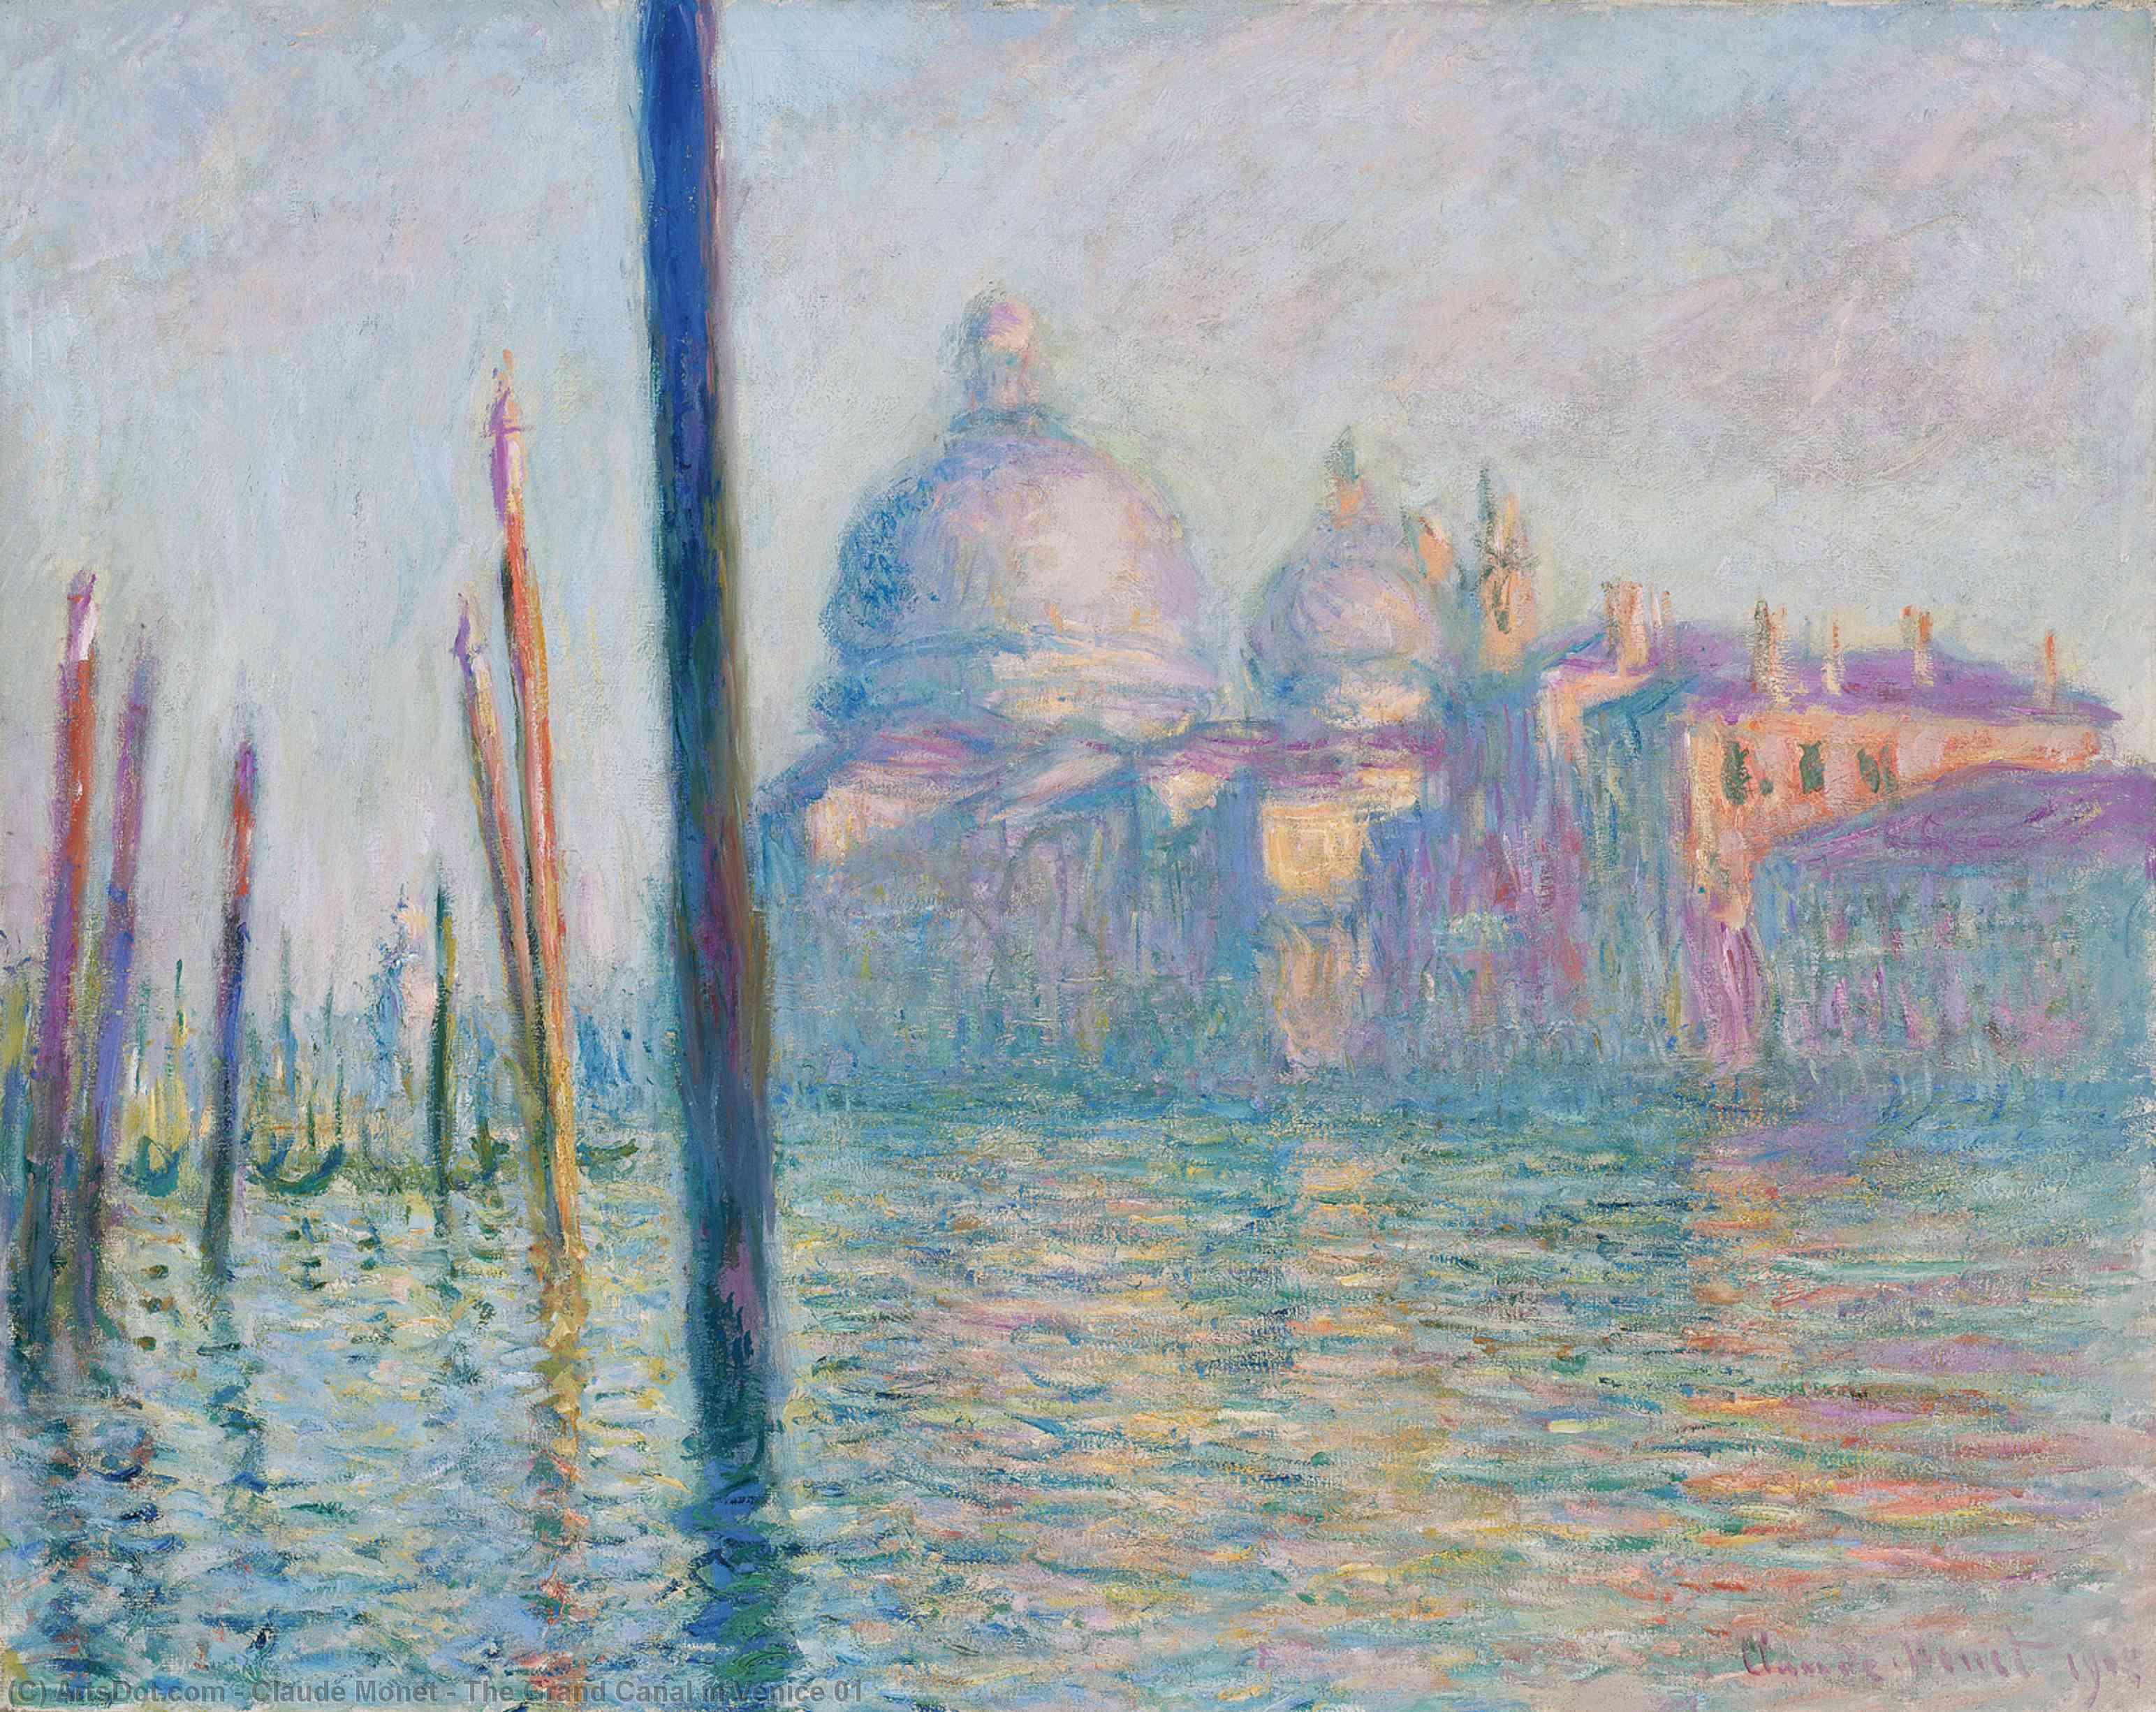 Claude Monet, Le Grand Canal, 1908, private collection. Wikimedia Commons (public domain).